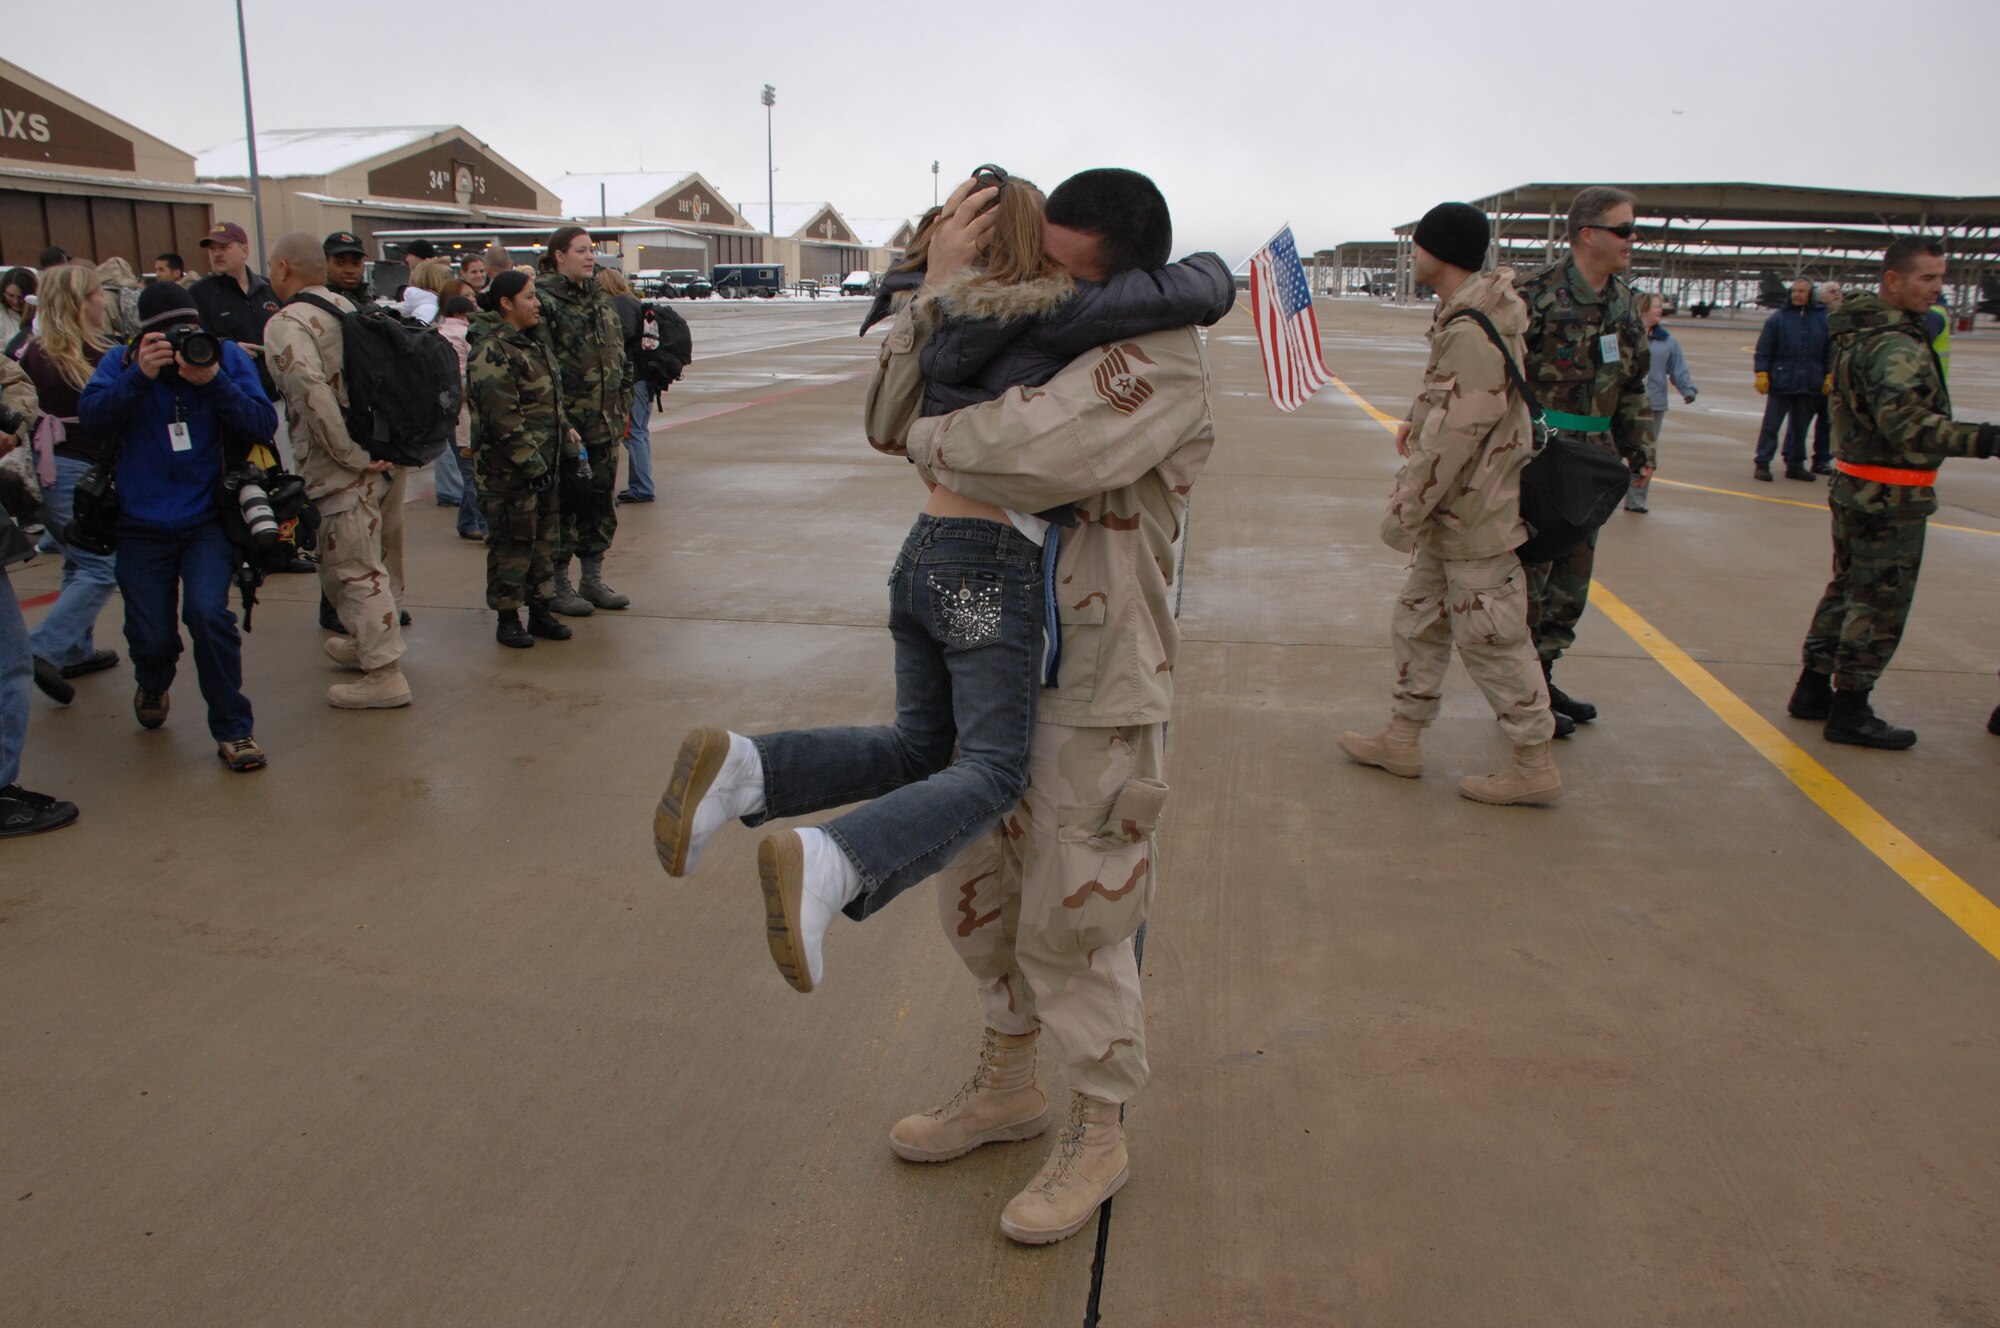 A 388th Fighter Wing Airman is greeted by a loved one at the 4th Fighter Squadron homecoming Jan. 8.  The wing's 4th Fighter Squadron deployed to Balad Air Base, Iraq in August and flew approximately 1,800 missions in support of ground forces in Operation Iraqi Freedom.  (U.S. Air Force photo by Alex Lloyd)